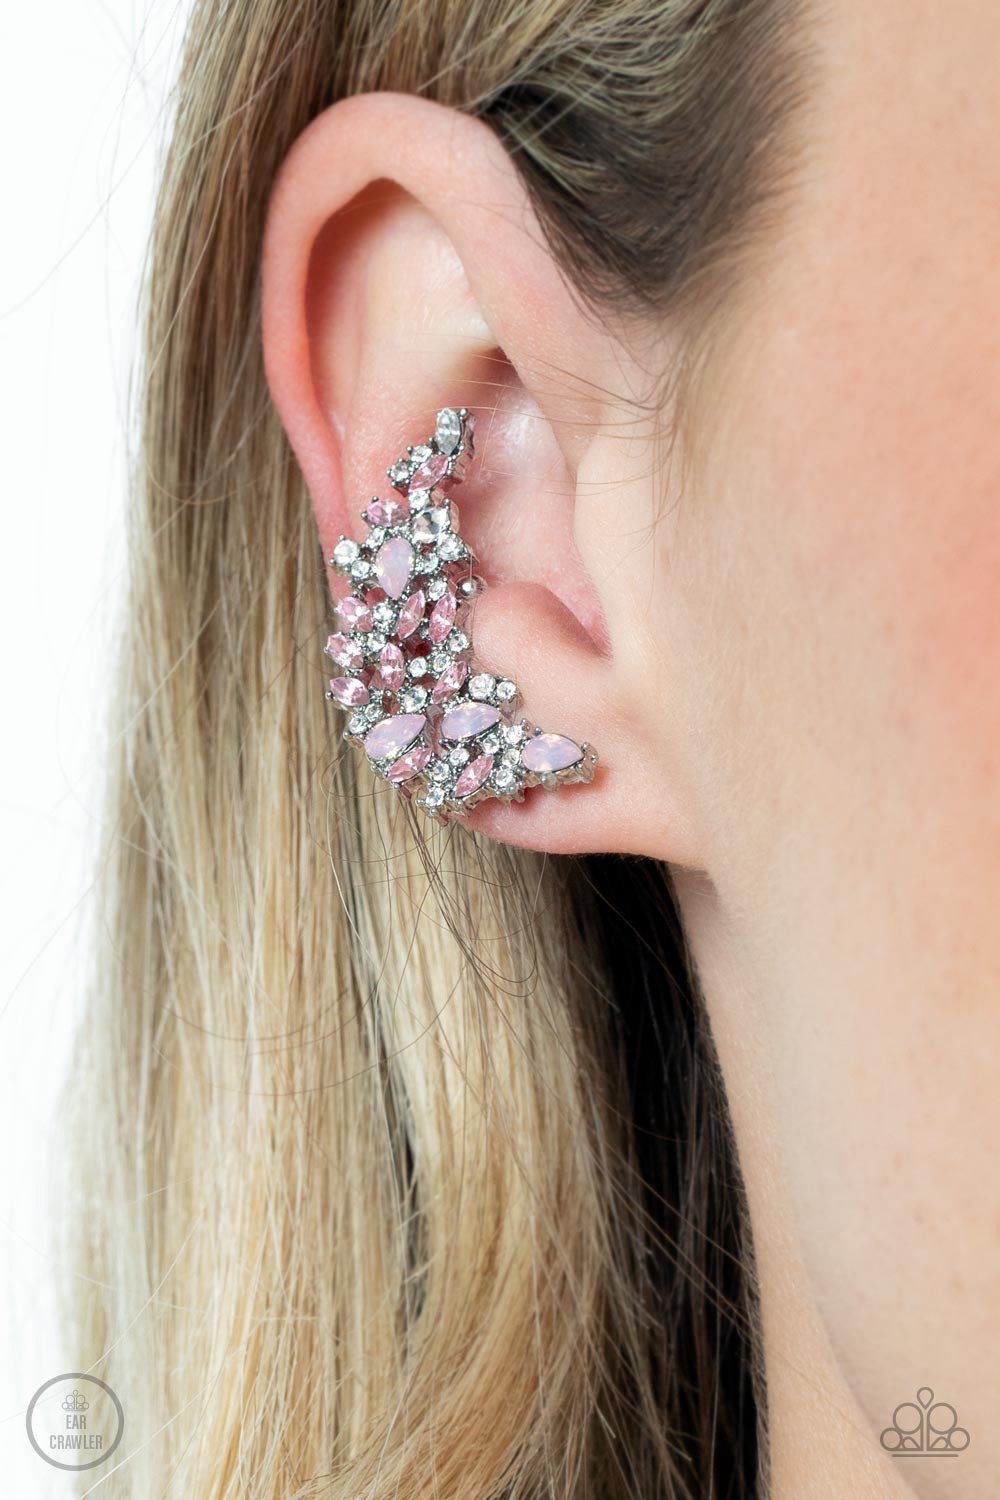 Prismatically Panoramic Earring (Pink, White)